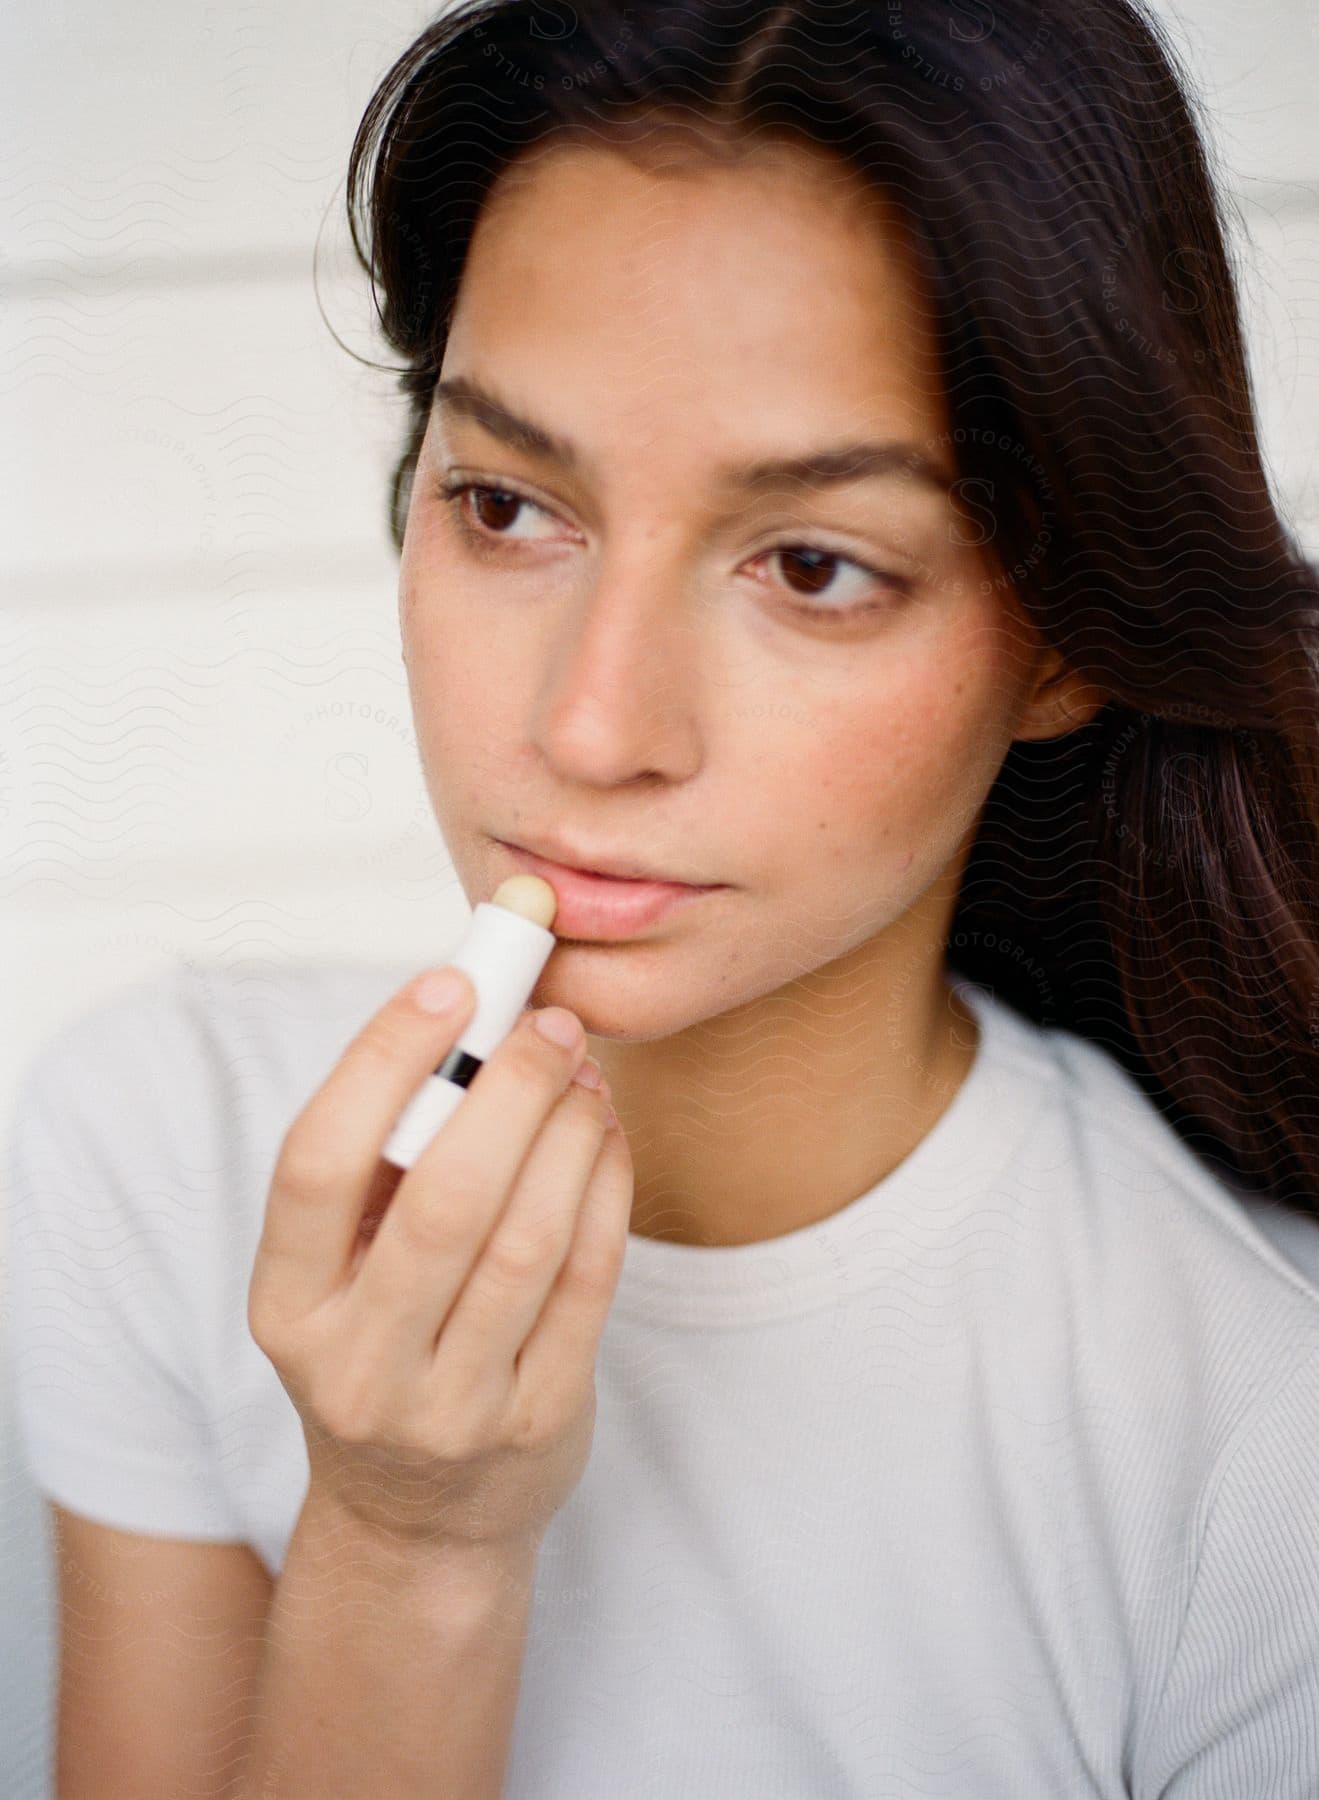 A woman in a white shirt applies lip balm while gazing thoughtfully to the side.